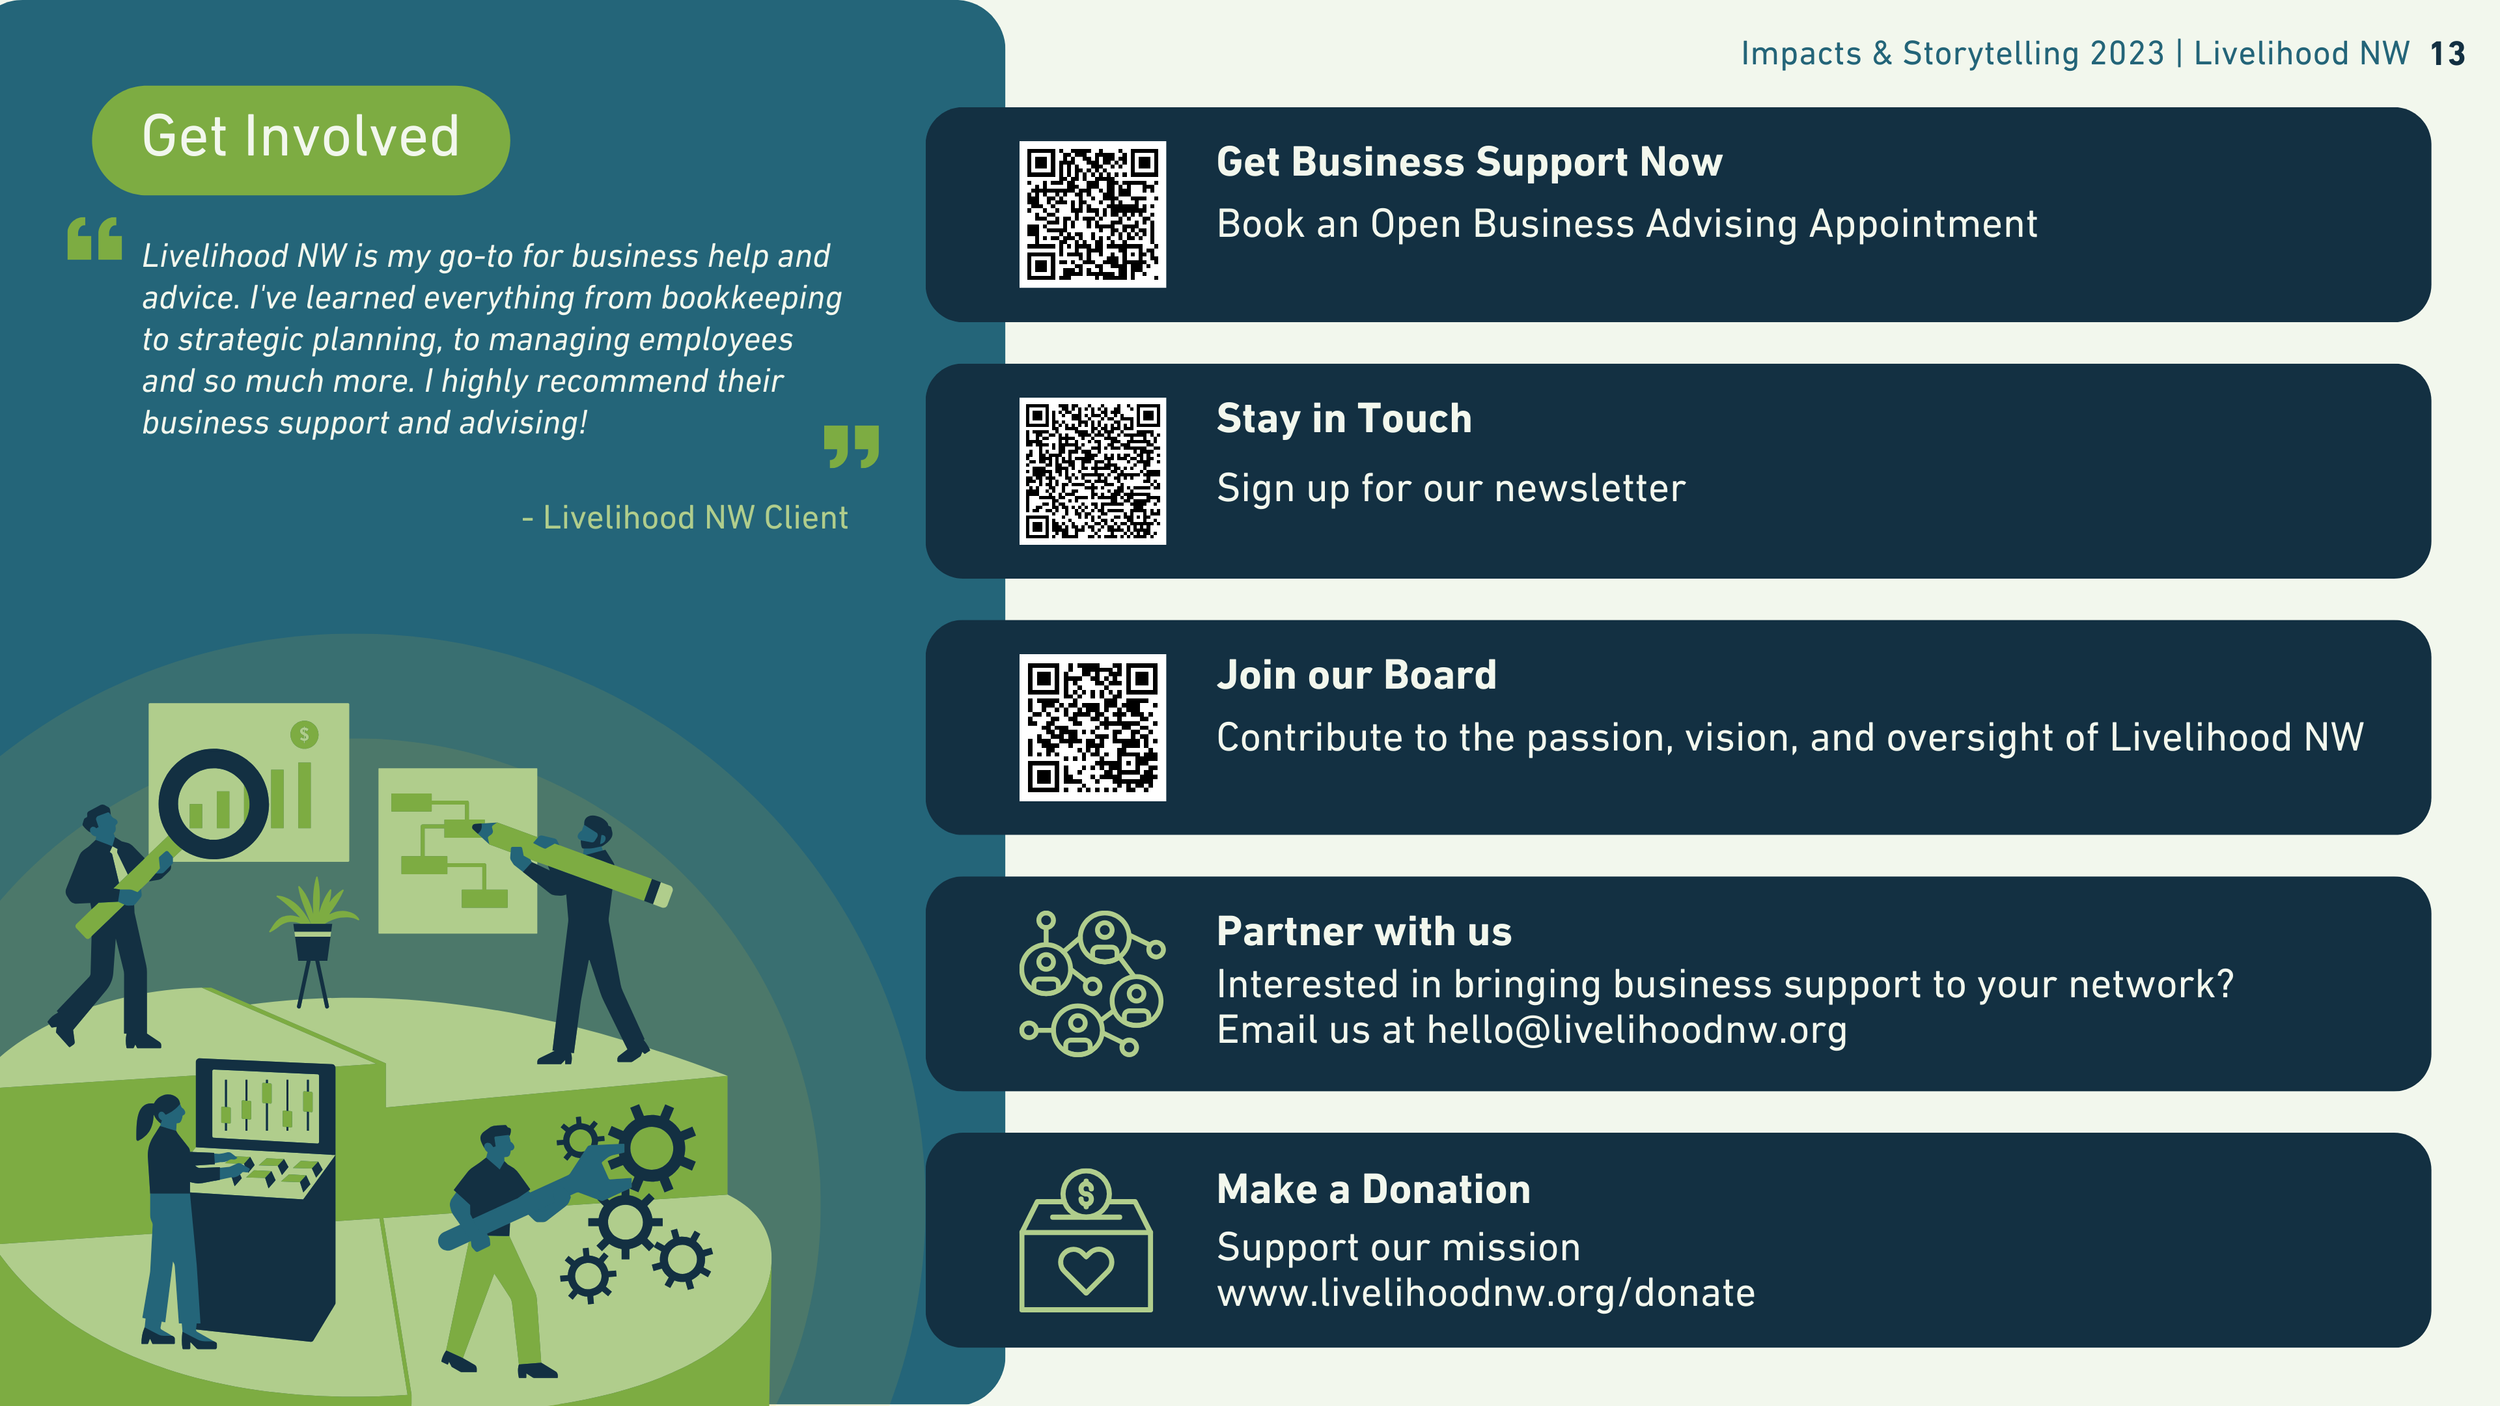   Open Business Advising  |  Newsletter Signup  |  Join Our Board  |  Partner With Us  |  Make a Donation  